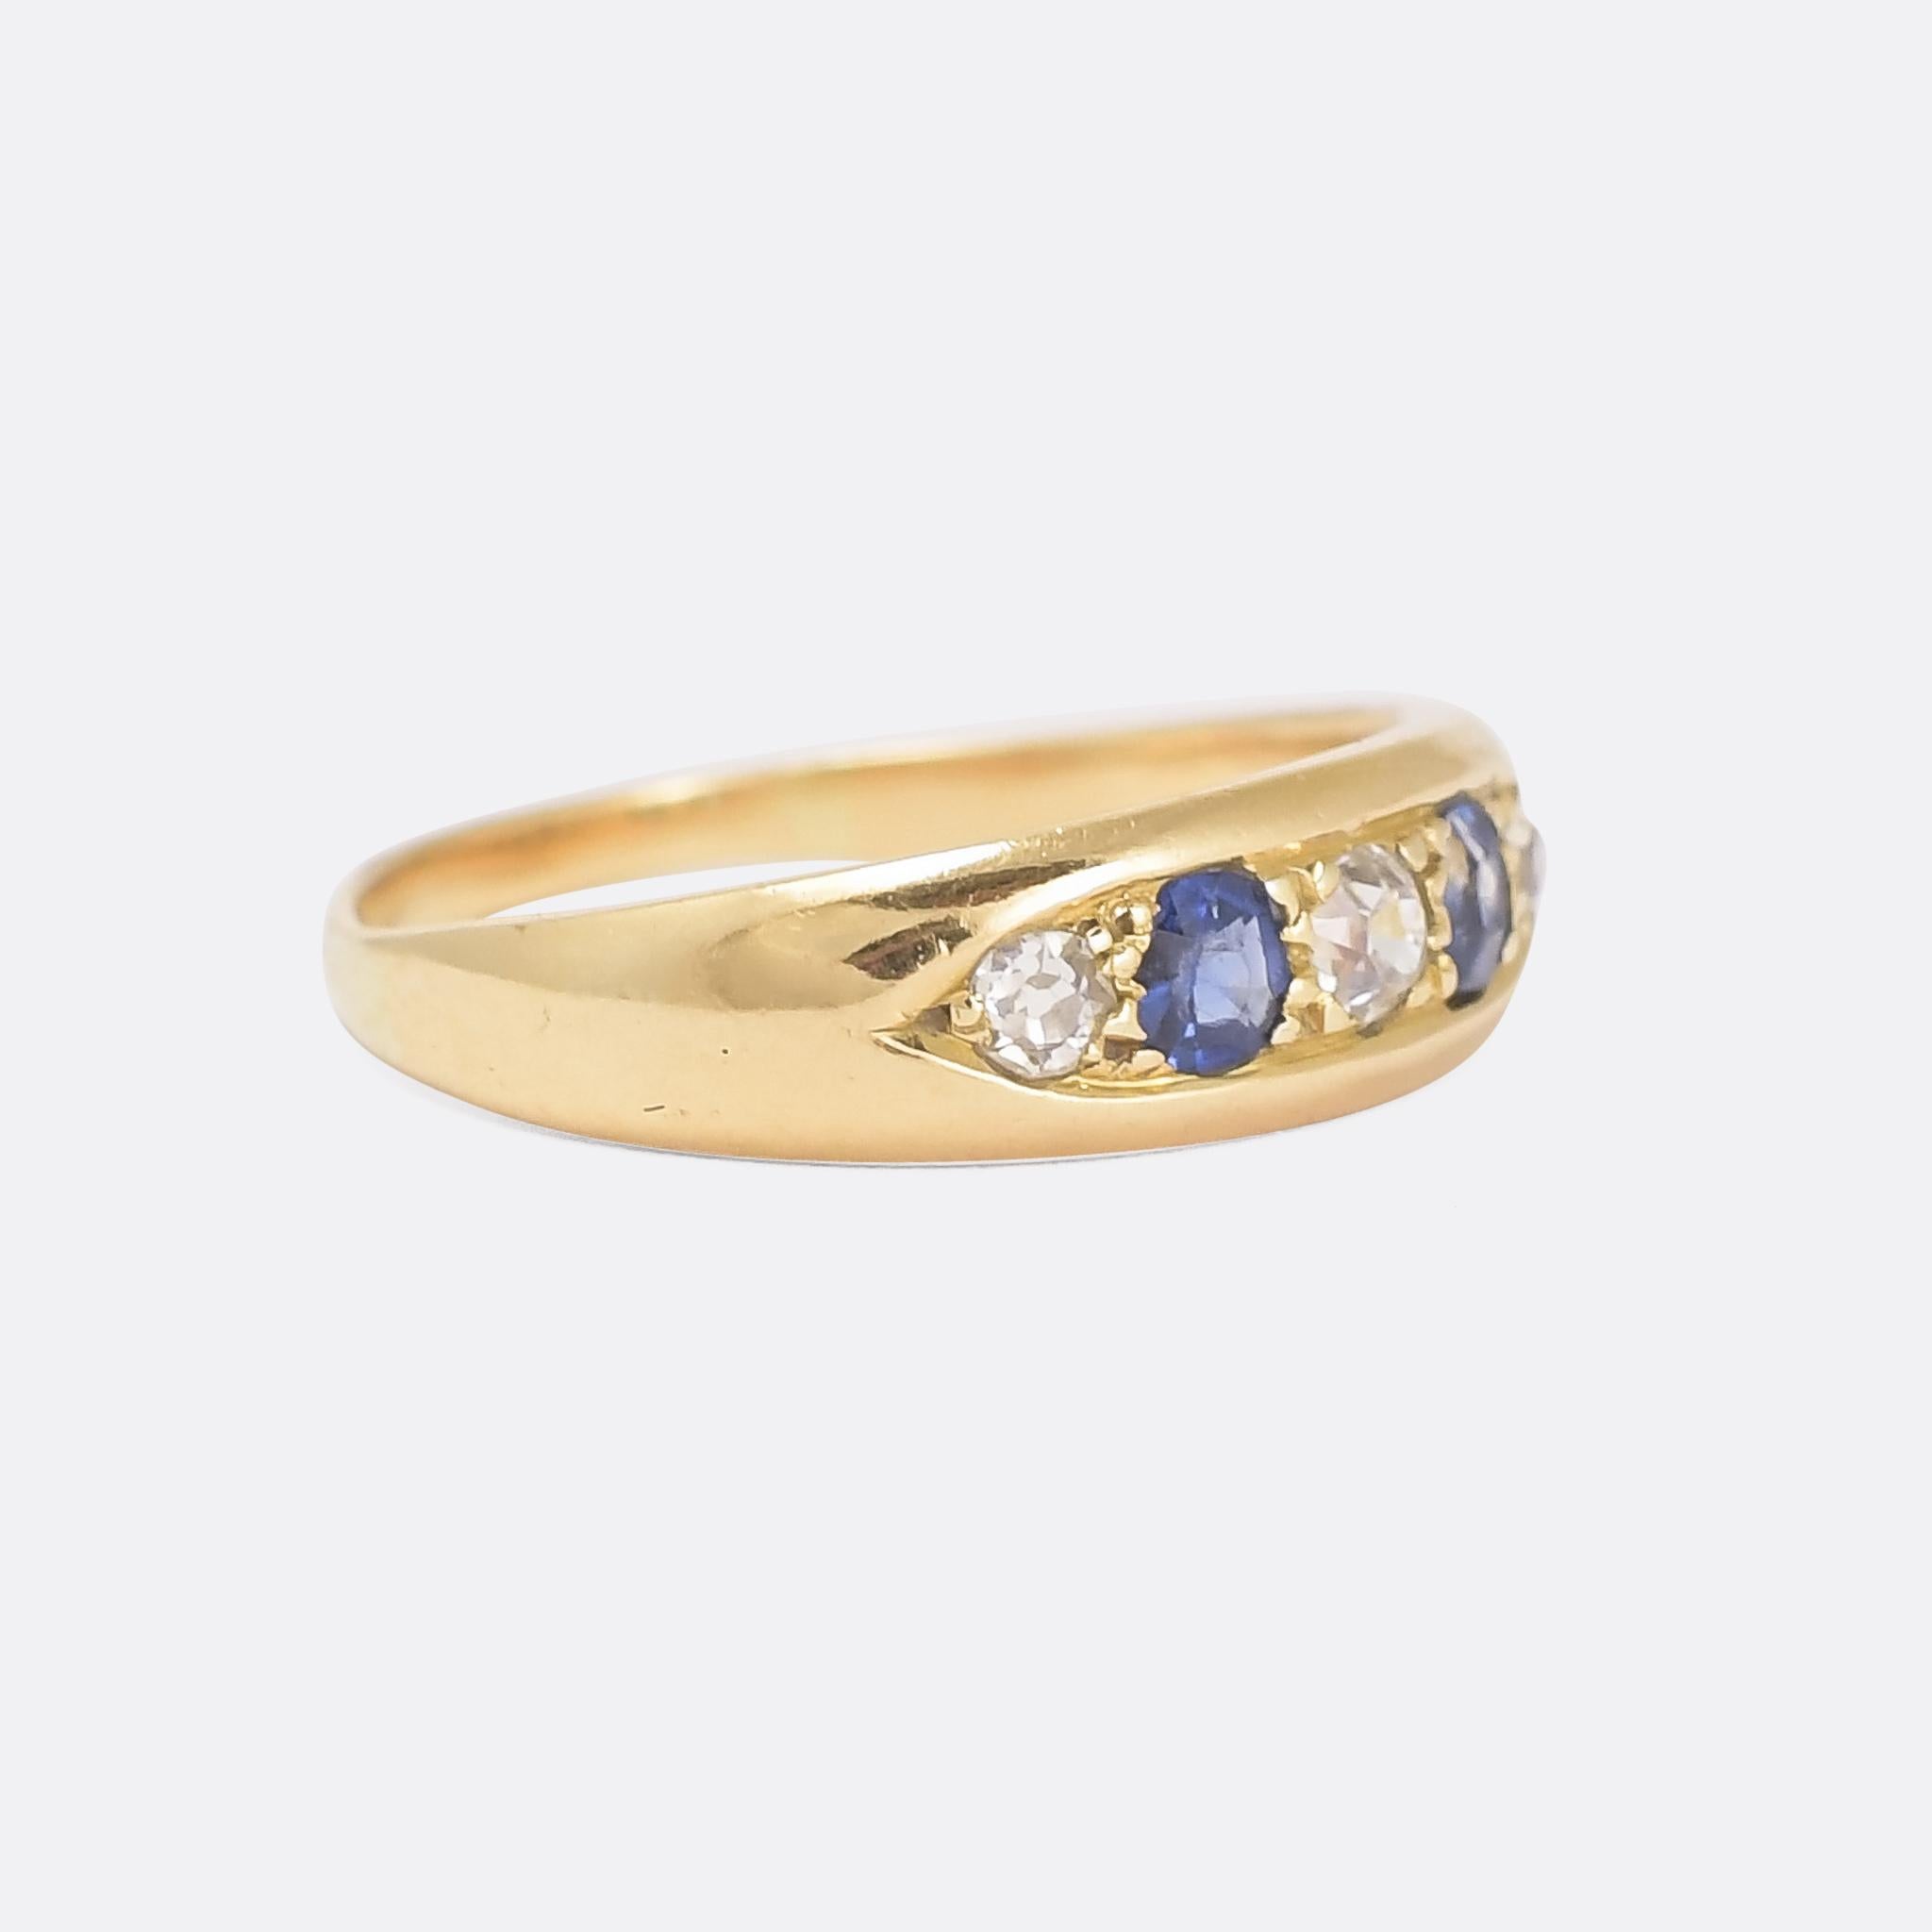 A cool antique gypsy band set with alternating blue sapphires and old mine cut diamonds. It dates from the late Victorian period, circa 1890, with a sleek profile that makes it ideal for stacking. Crafted in 15 karat gold.

STONES 
Old Mine Cut